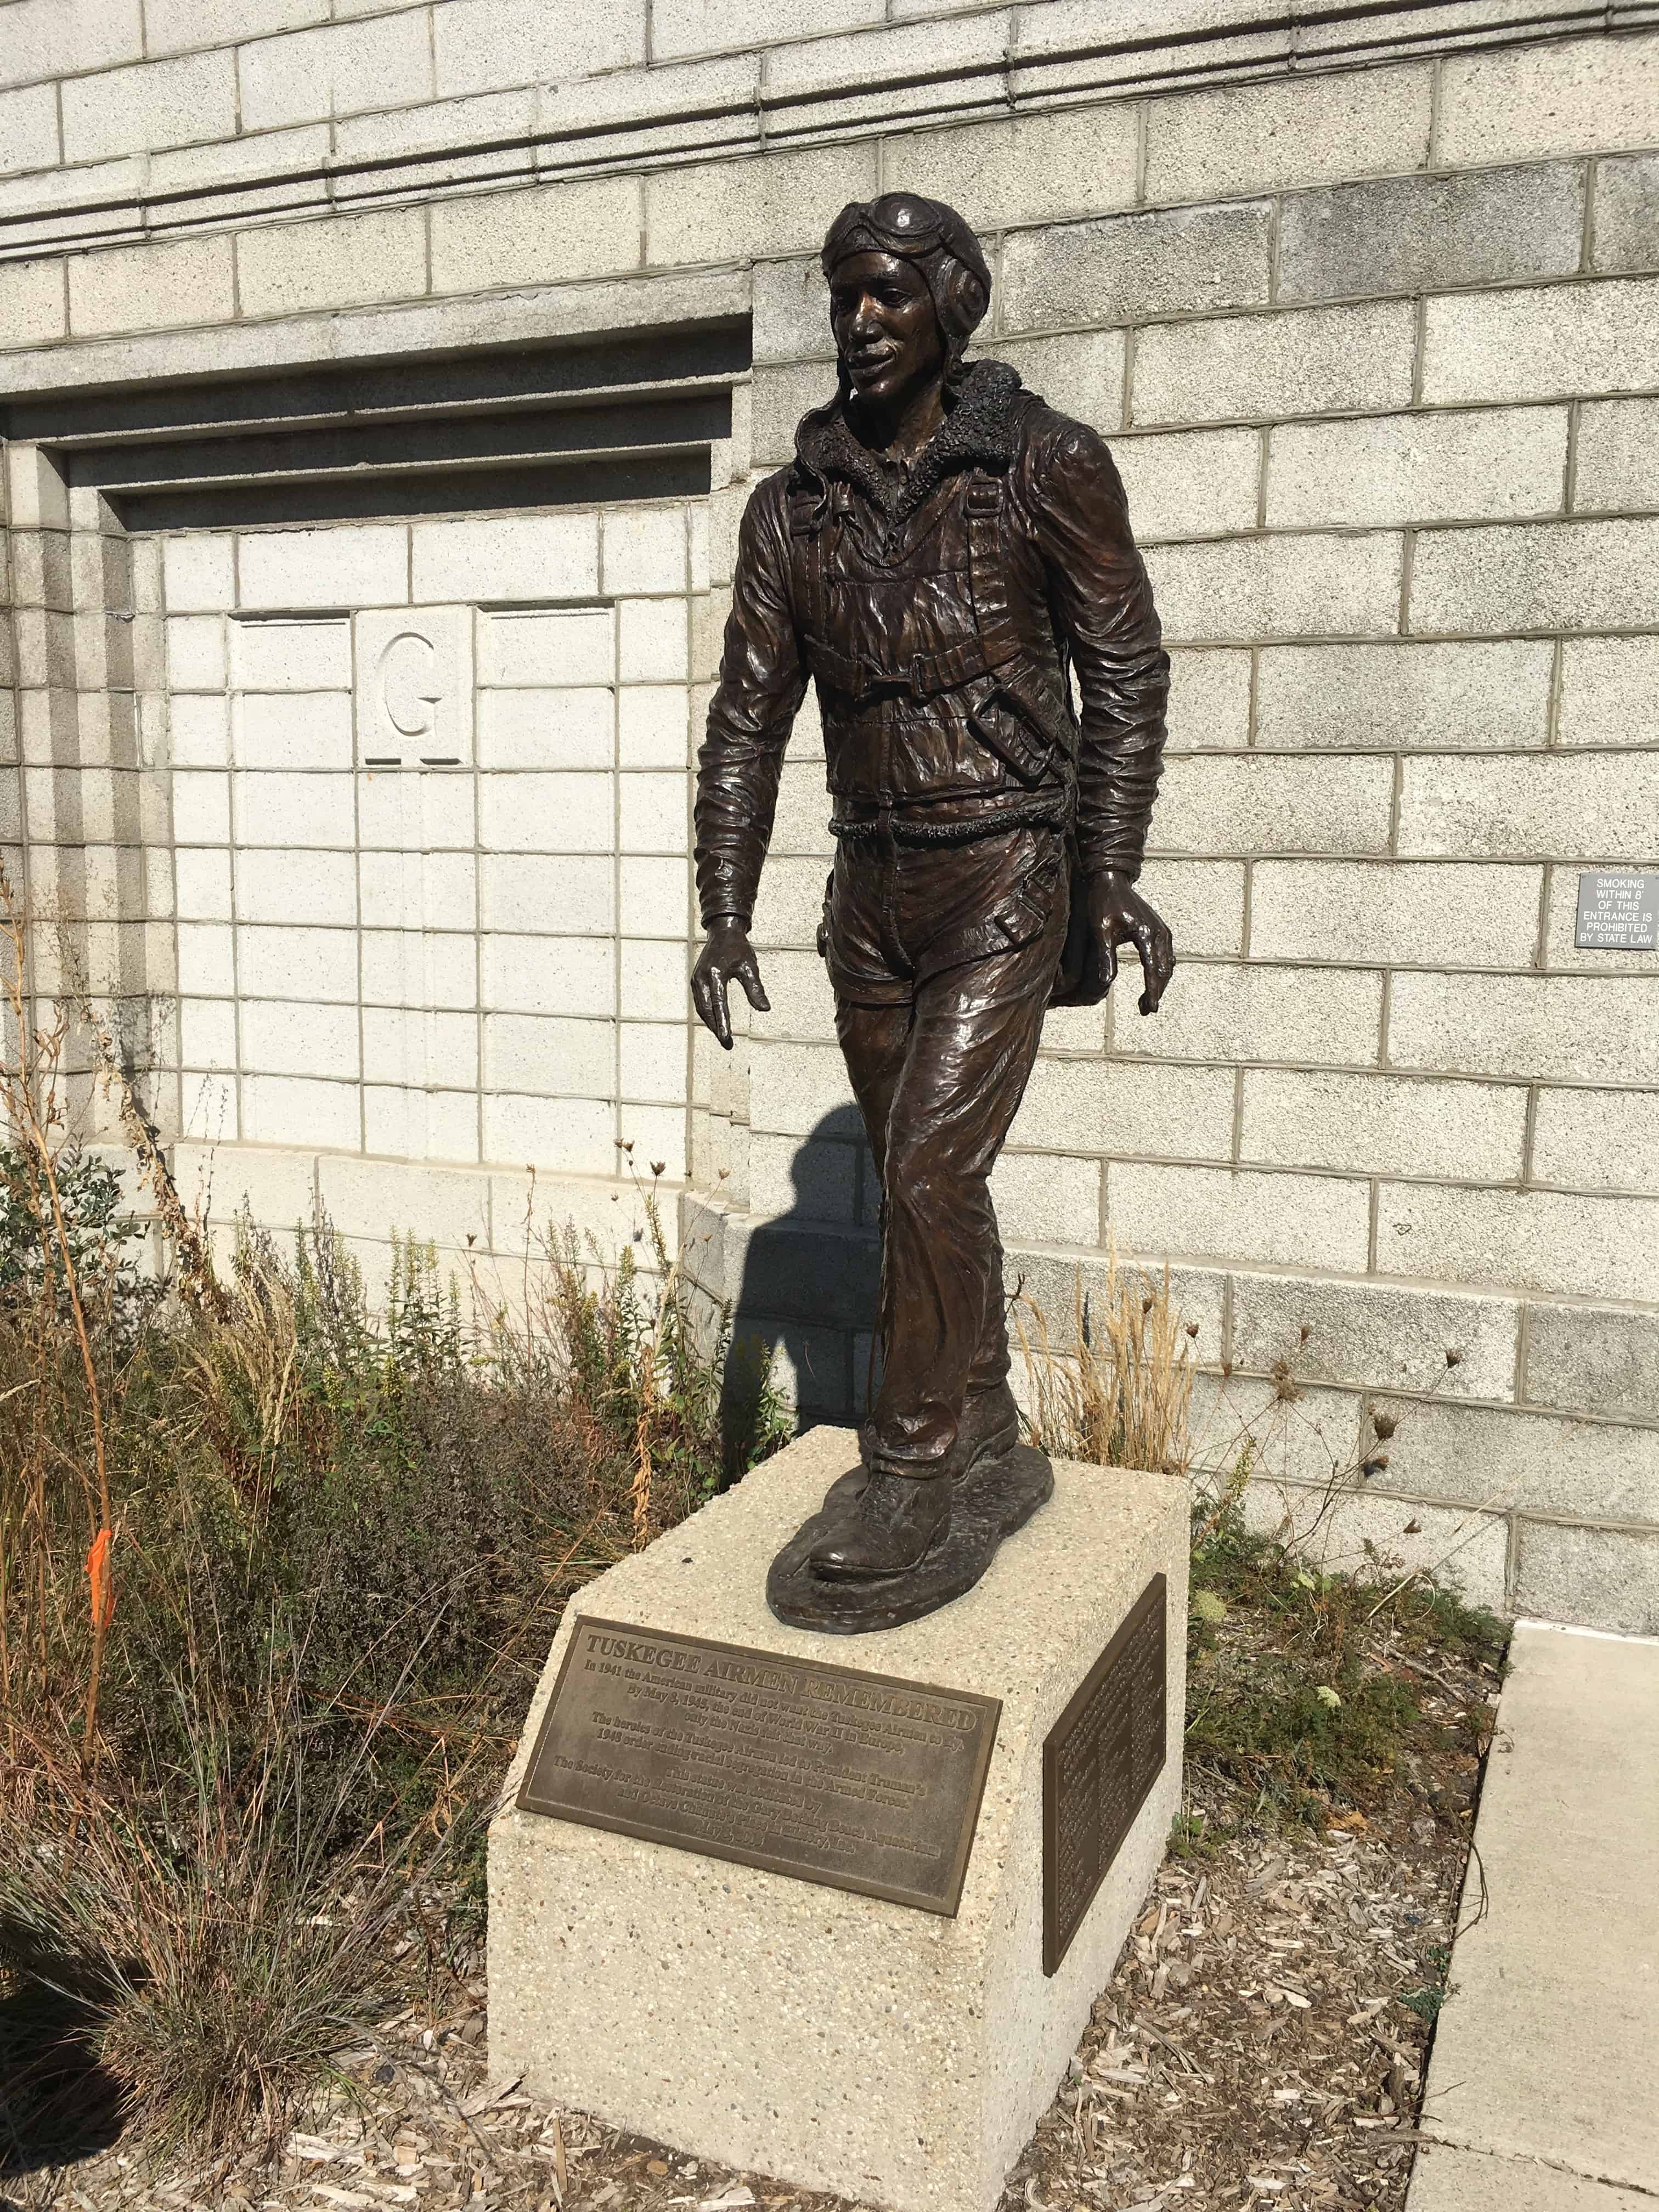 Tuskegee Airmen statue at Marquette Park, Miller Beach, Gary, Indiana